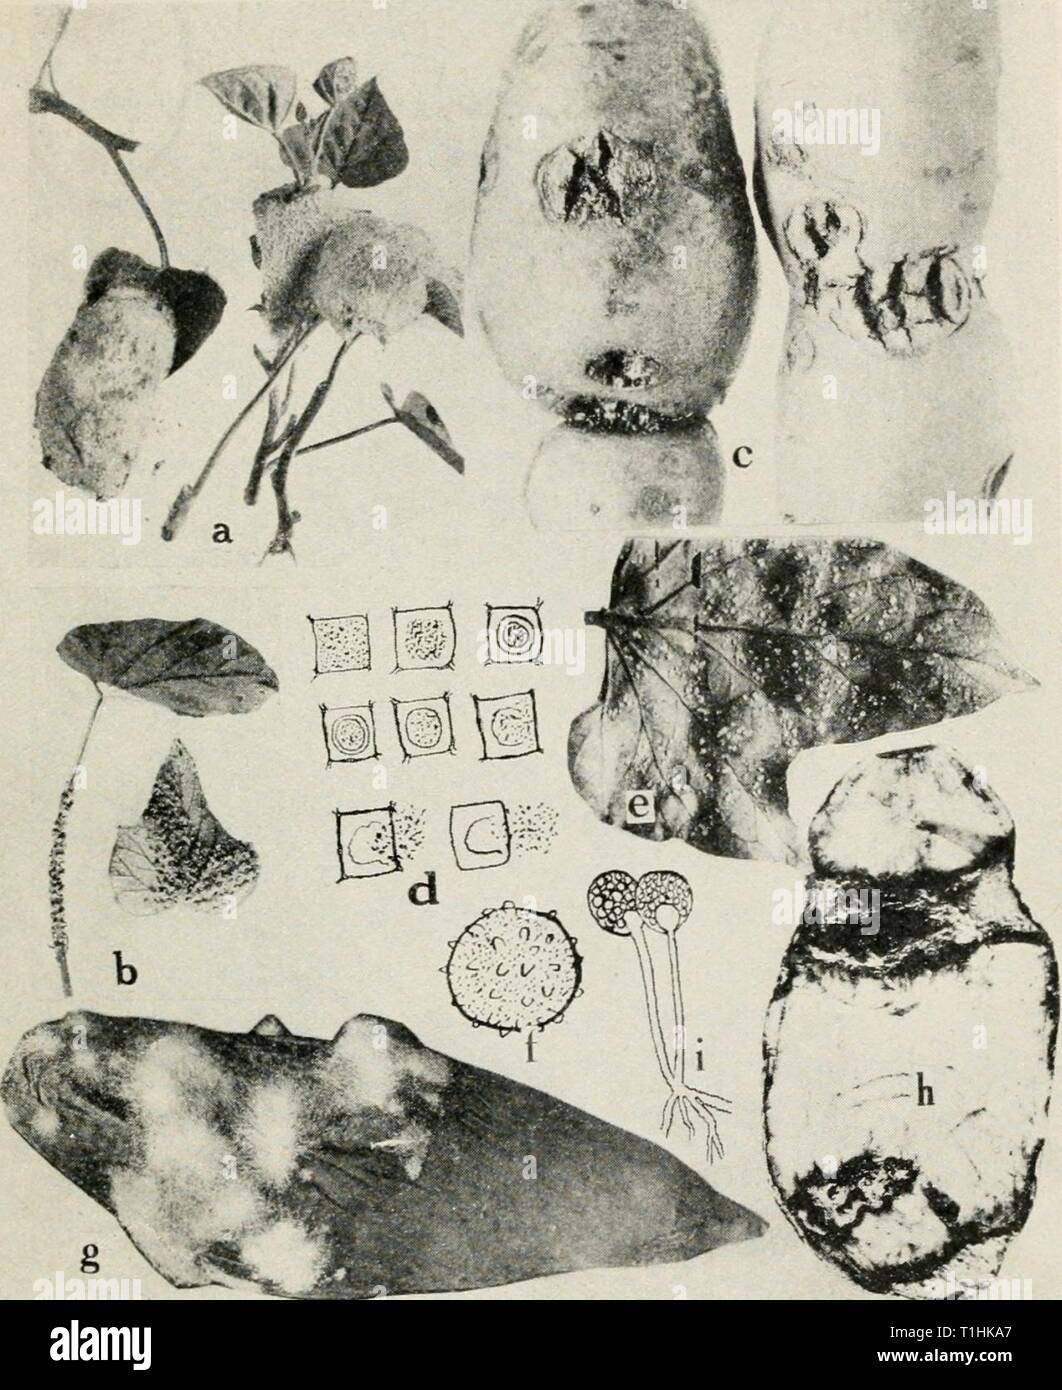 Diseases of truck crops and Diseases of truck crops and their control  diseasesoftruckc00taubuoft Year: [1918]  Fig. 25. Sweet Potato Diseases. a. Slime mold {Fuligo violacea), b. slime mold (Physarum plumbeum), c. pox or pit, d. formation of a cyst and liberation of spores of Cyslospnra halala (after Elliot), e. white rust, /. oospore of the white rust fungus, g. soft rot, h. ring rot, i. fruiting stalks of Rhizopus nigricans. Stock Photo